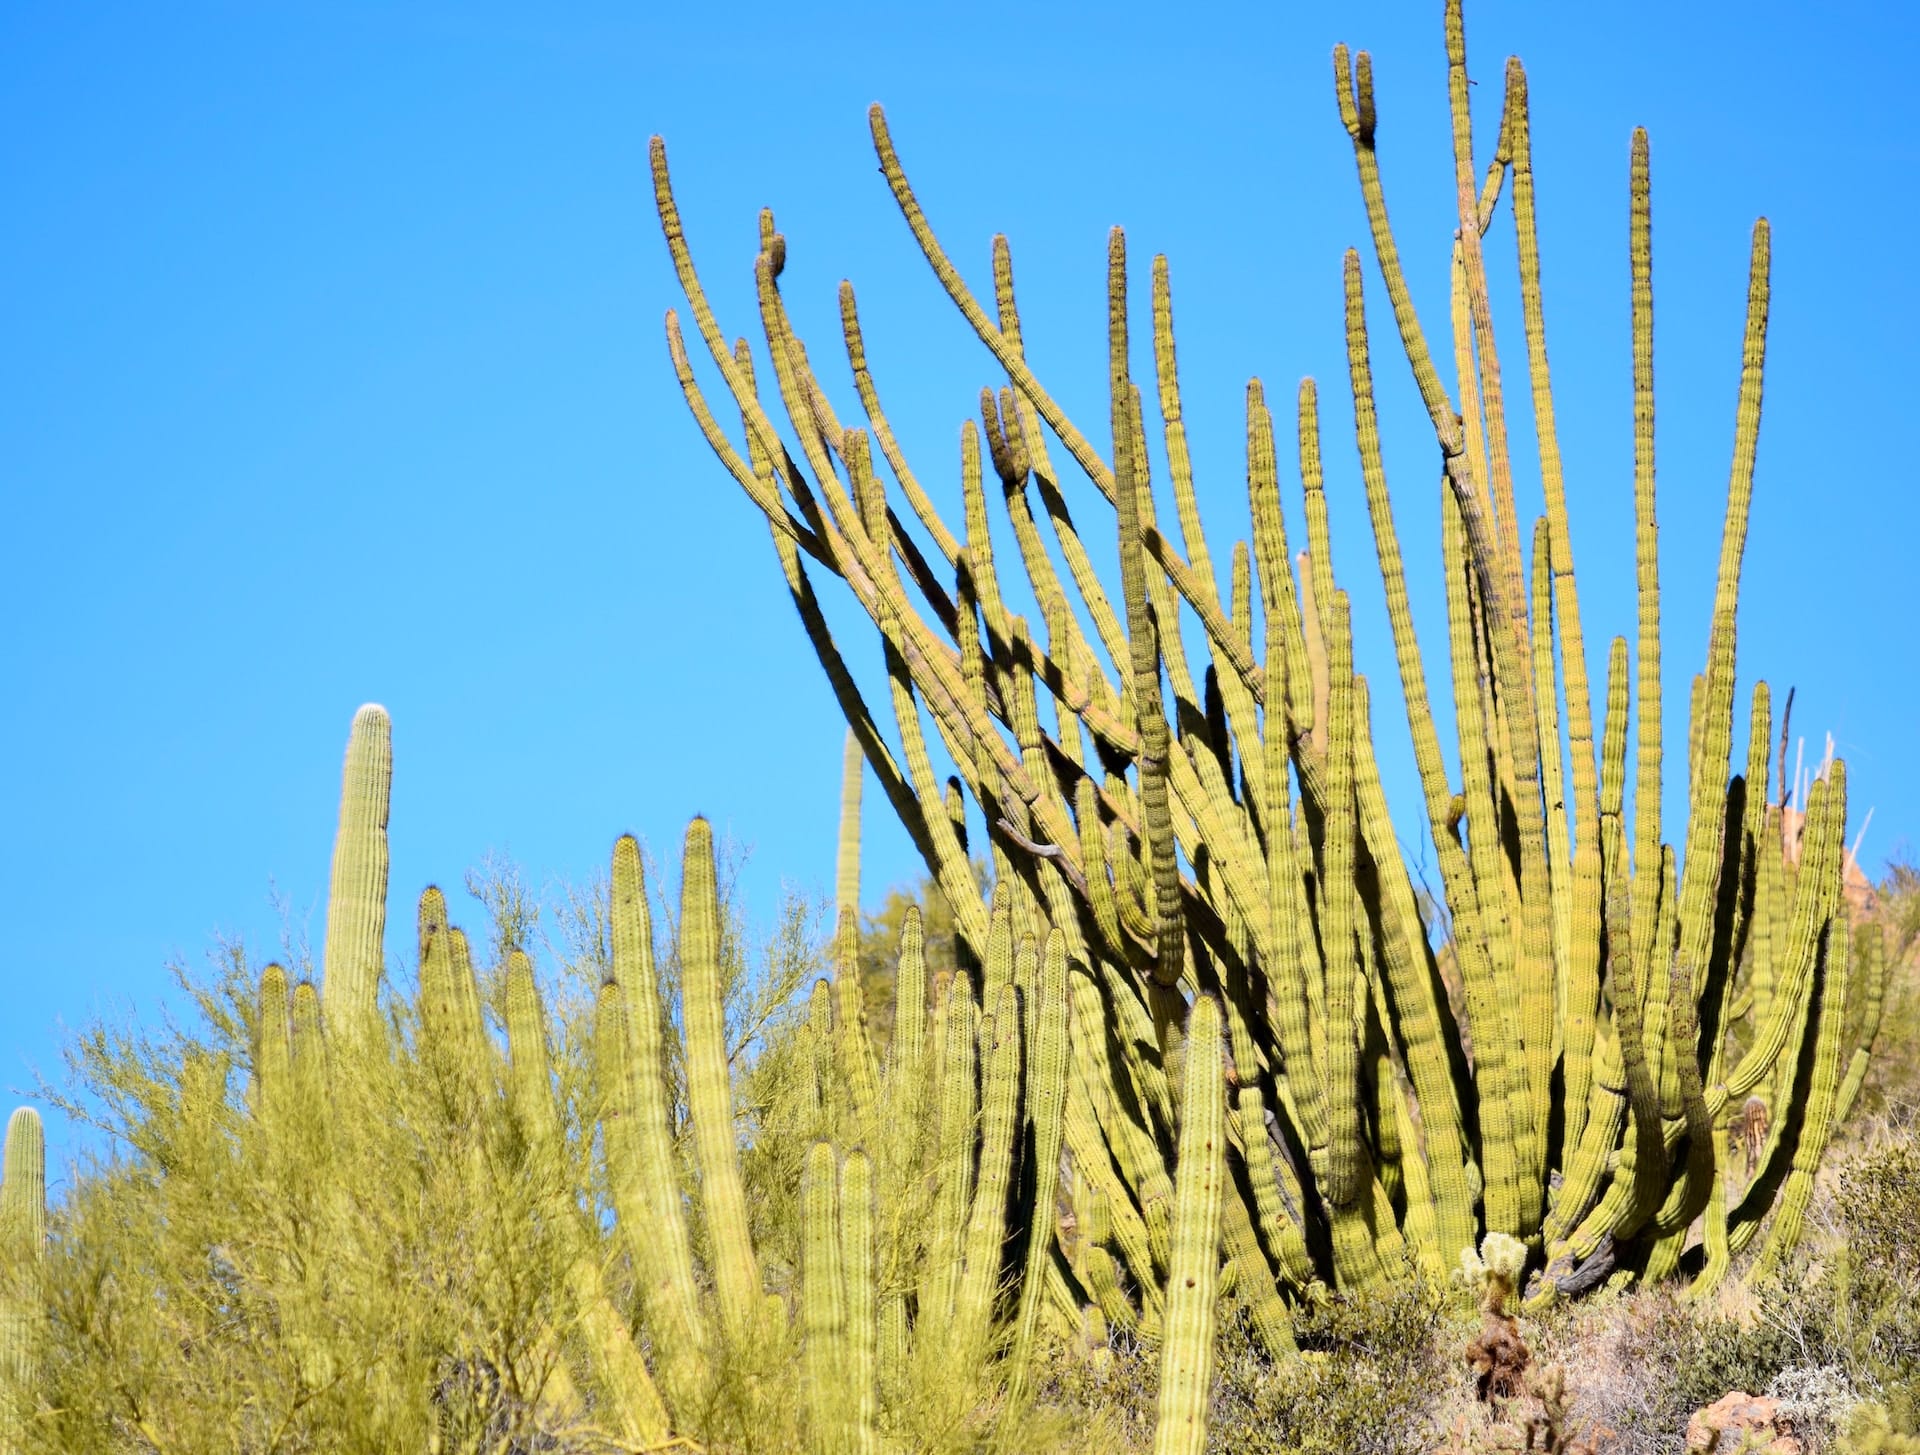 The Organ Pipe Cactus National Monument